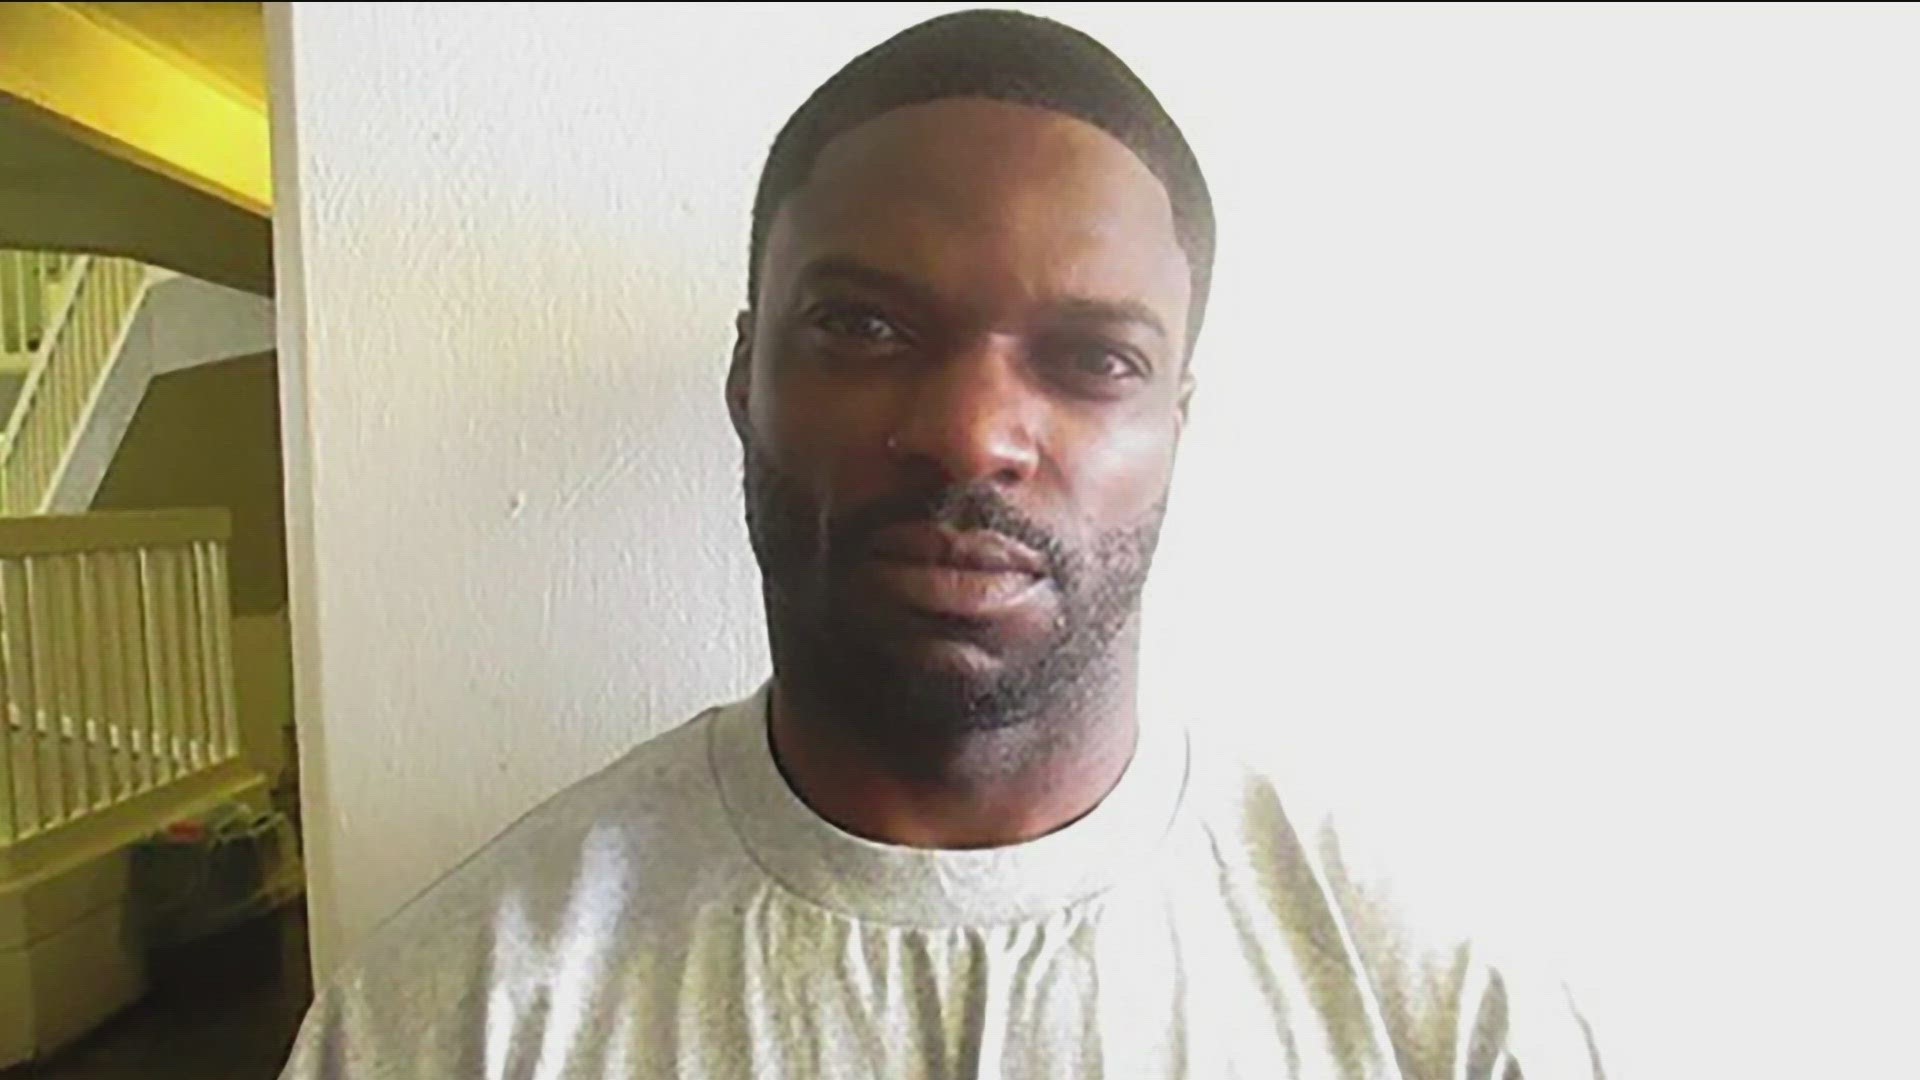 Michael Dewayne Smith was recently denied clemency for the shooting and killing of two people in Oklahoma City more than two decades ago.